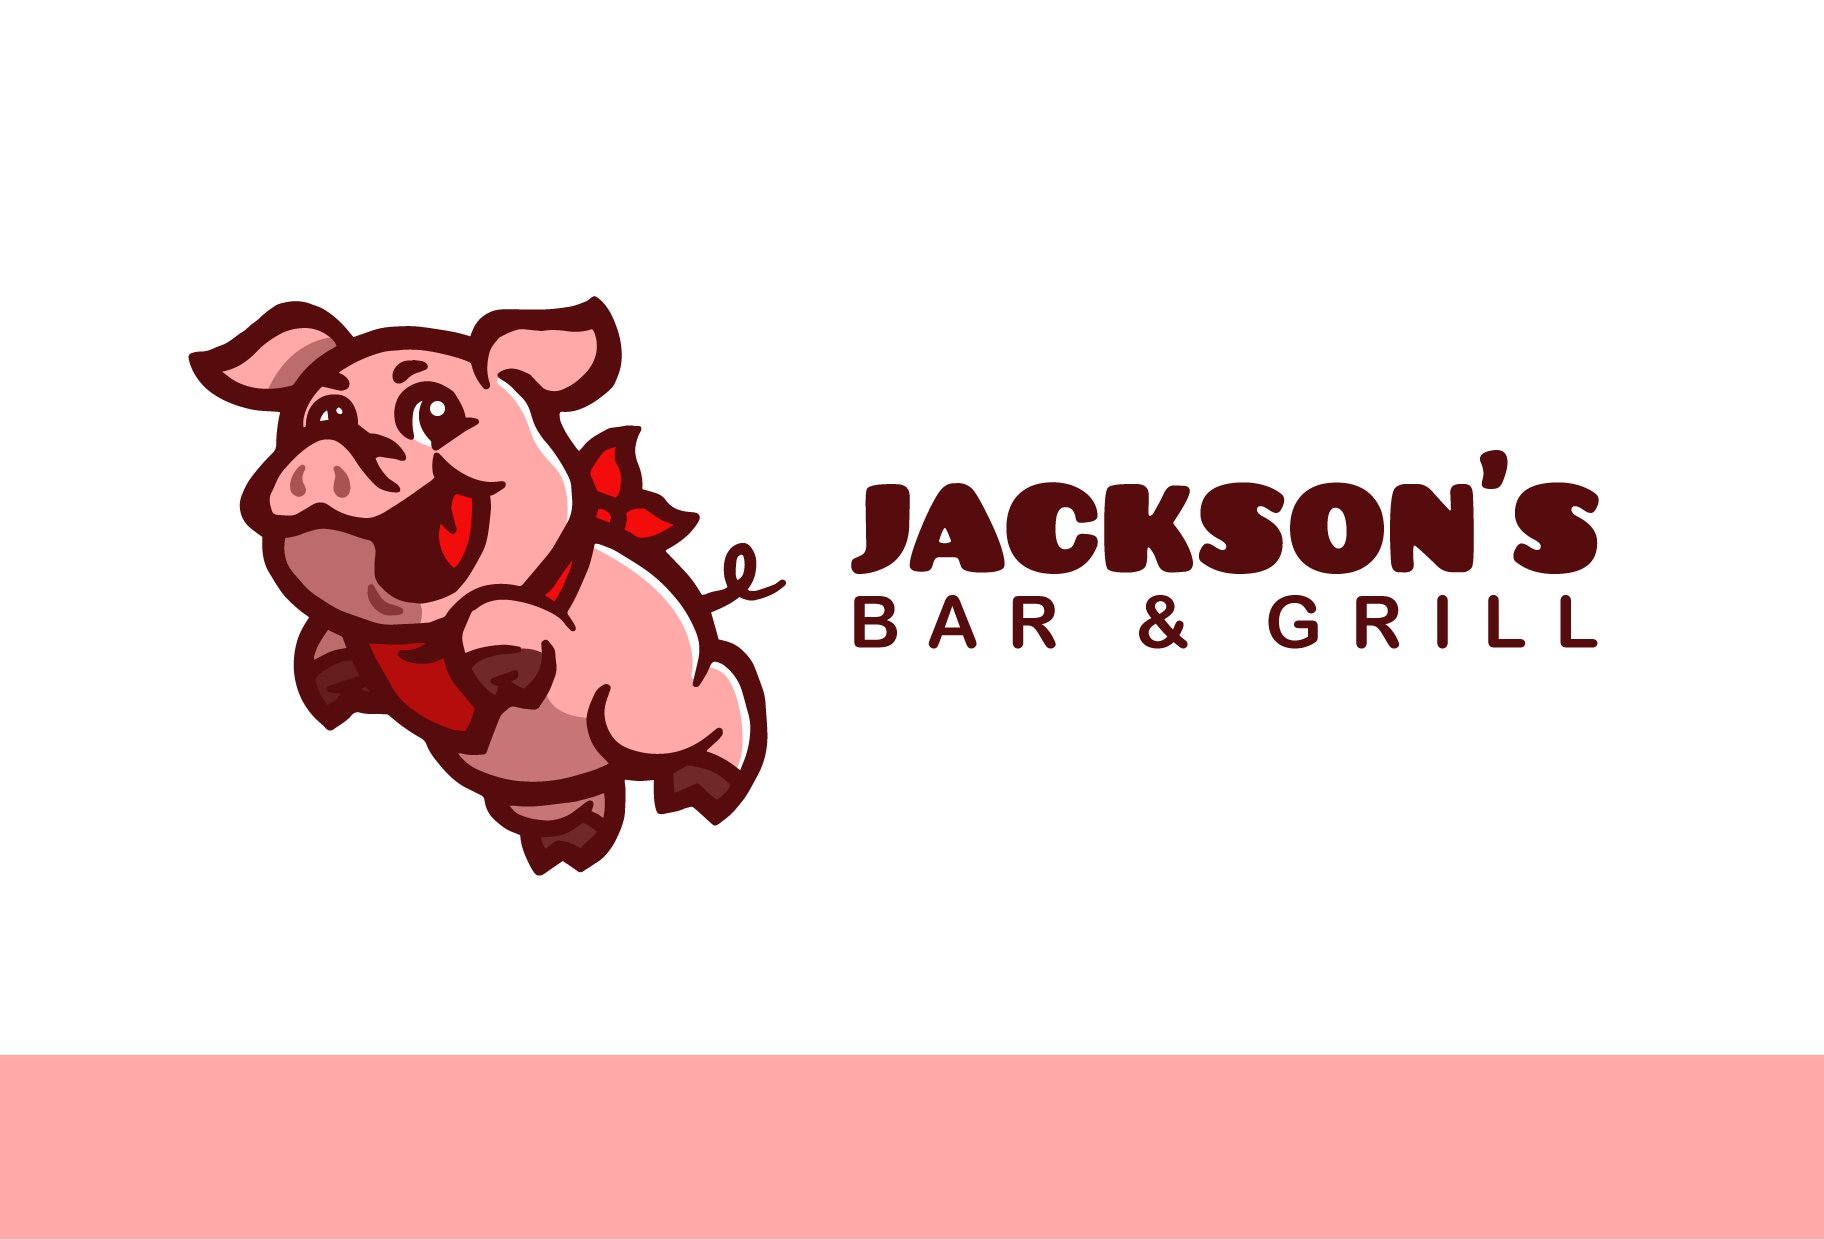 Bar and Grill Logo Design Template cover image.